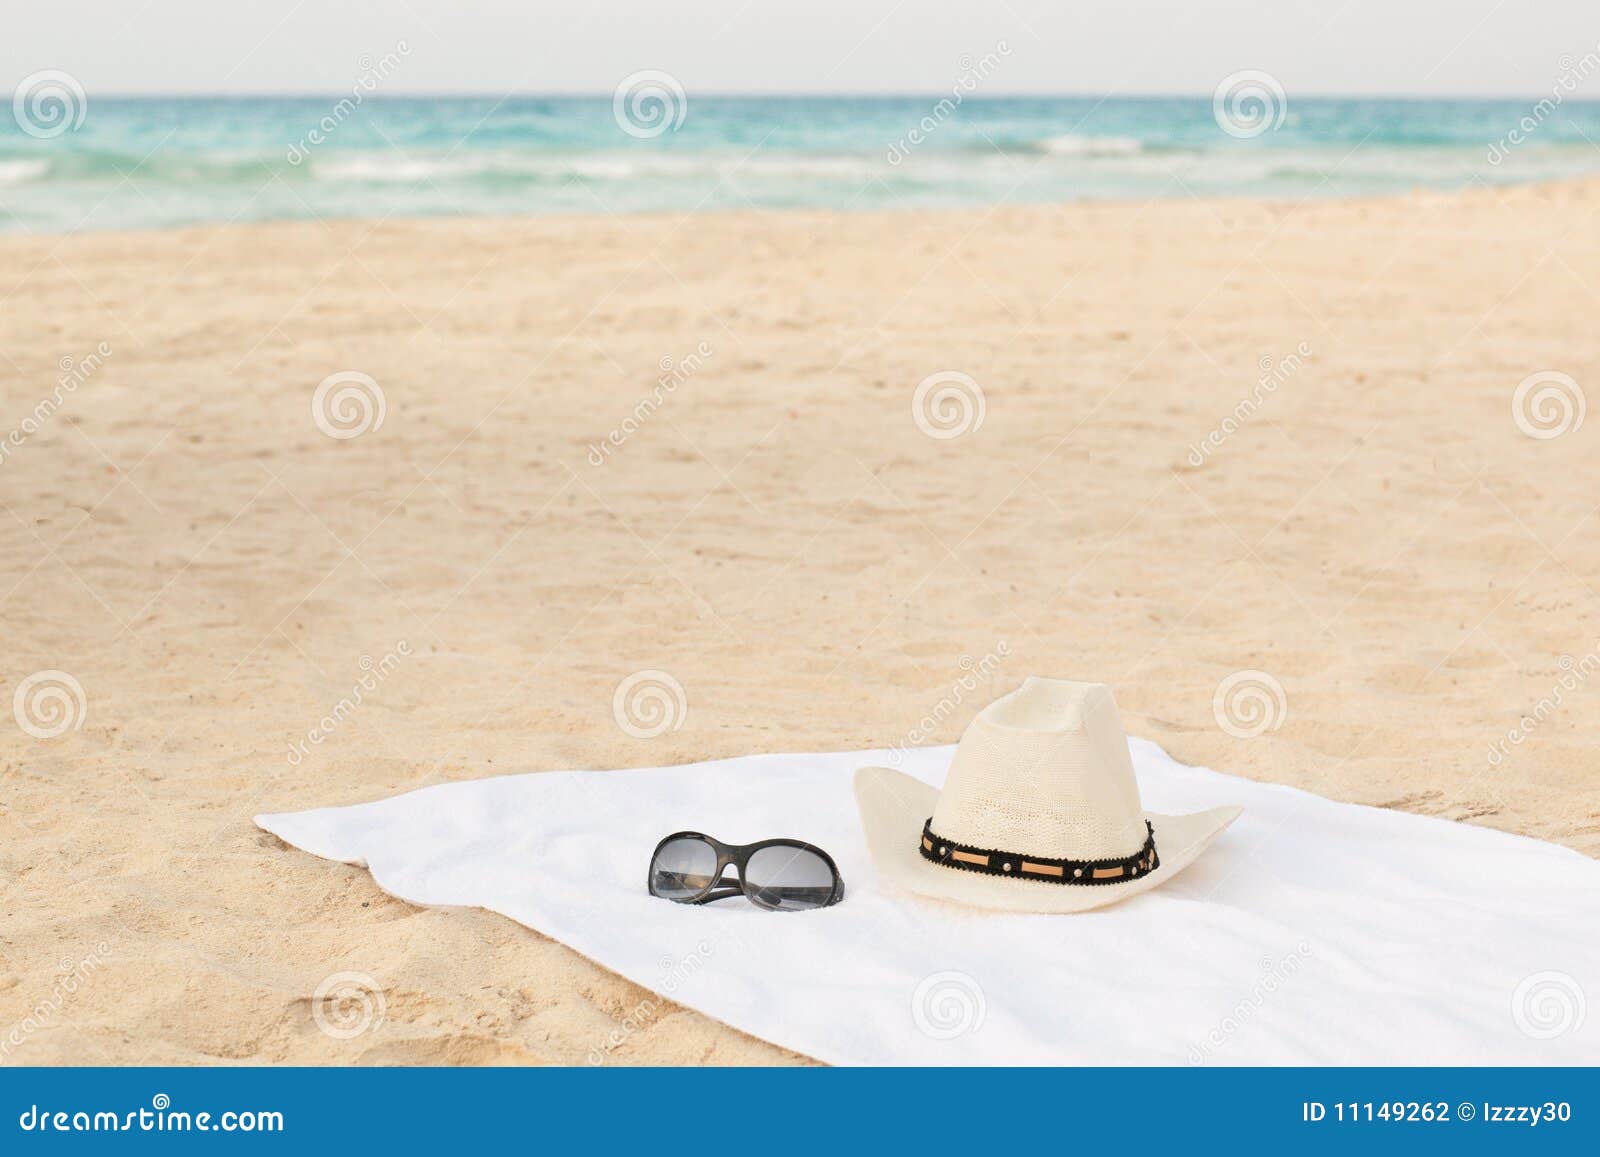 white towel on the beach with sunglasses and hat